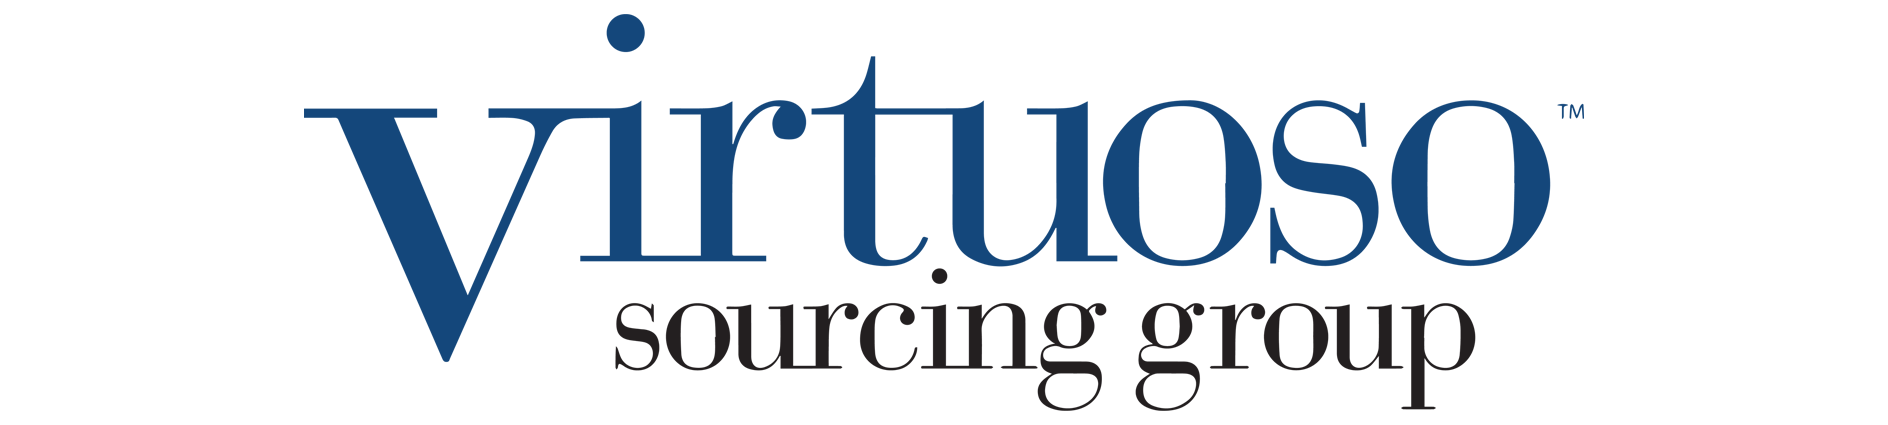 Virtuoso Sourcing Group | Connecting Organizations with Their Customers